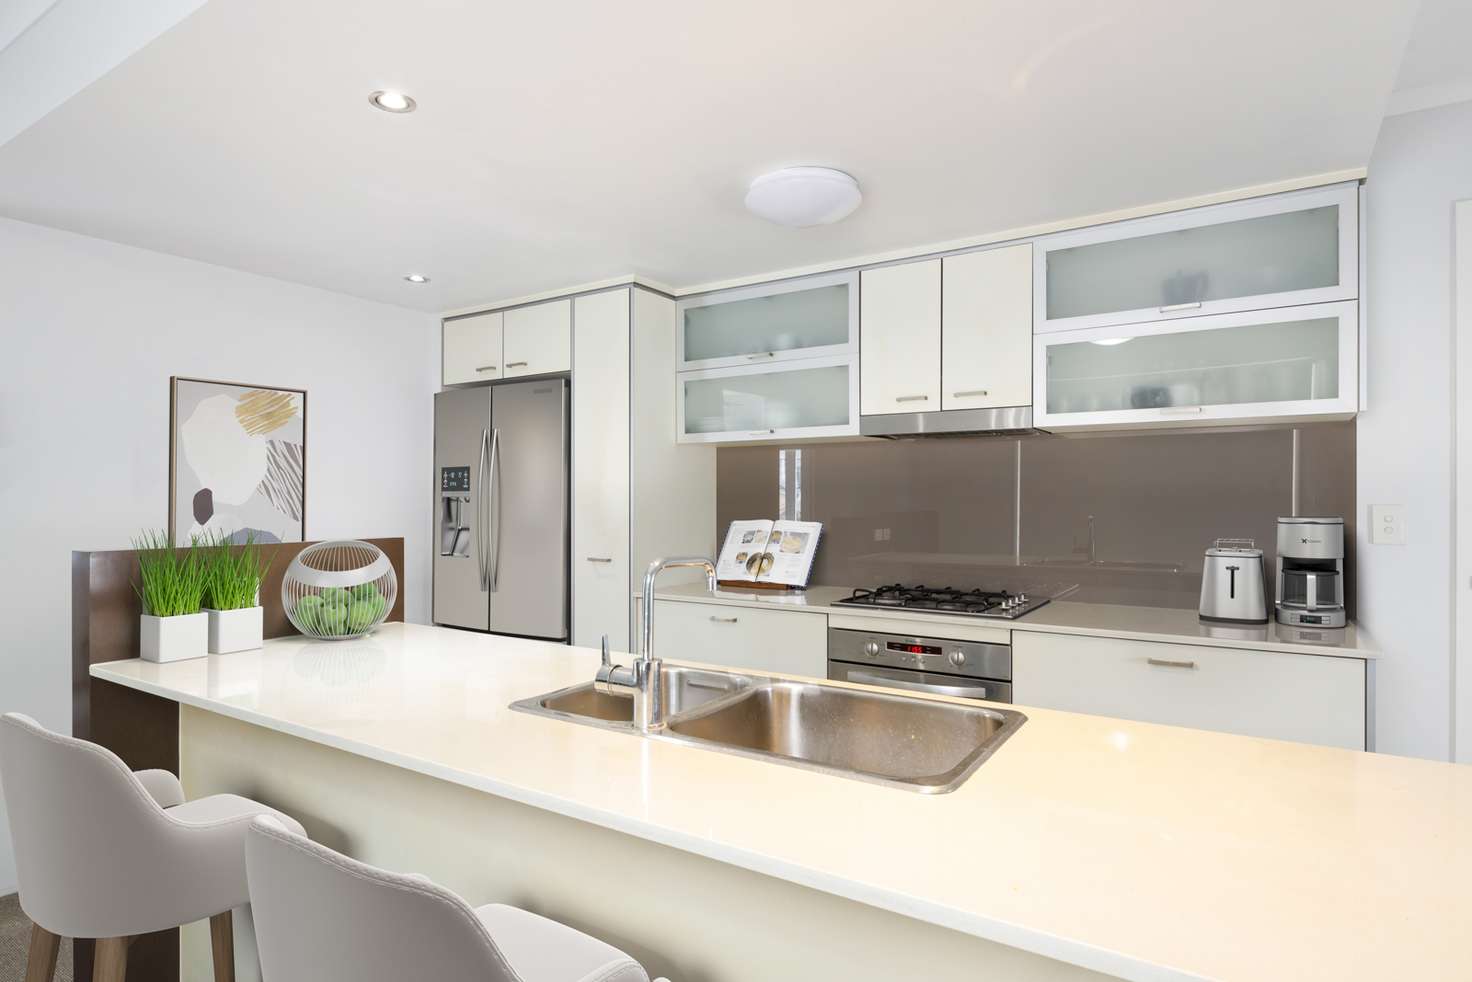 Main view of Homely apartment listing, 603/6 Exford Street, Brisbane QLD 4000